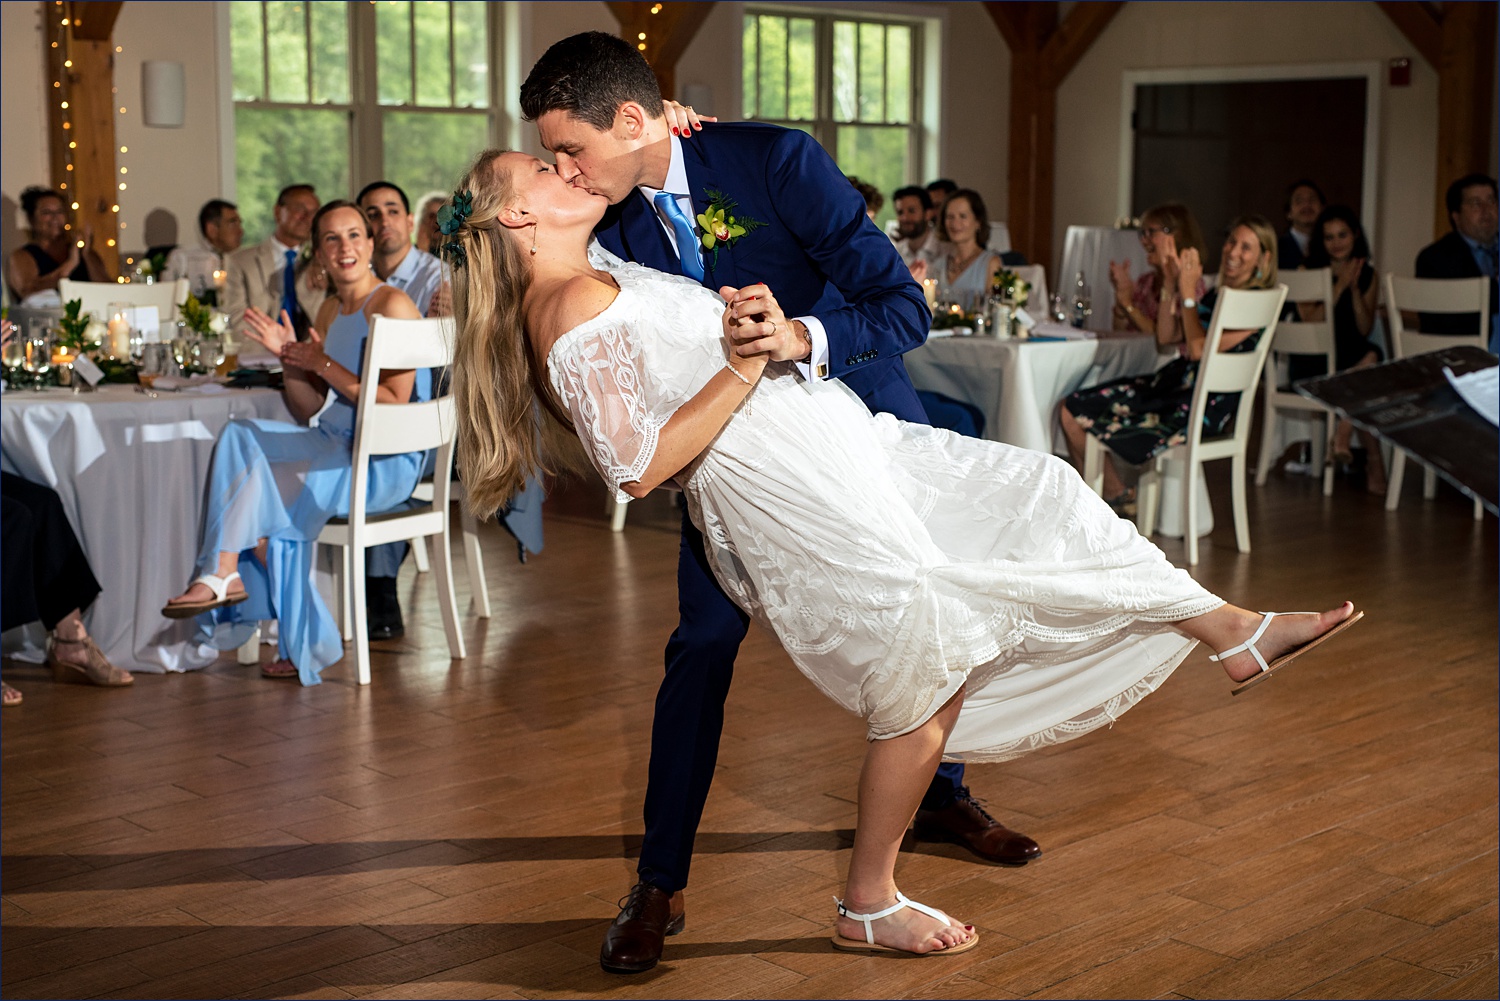 A dip and a kiss on the dance floor during the first dance of the newlyweds